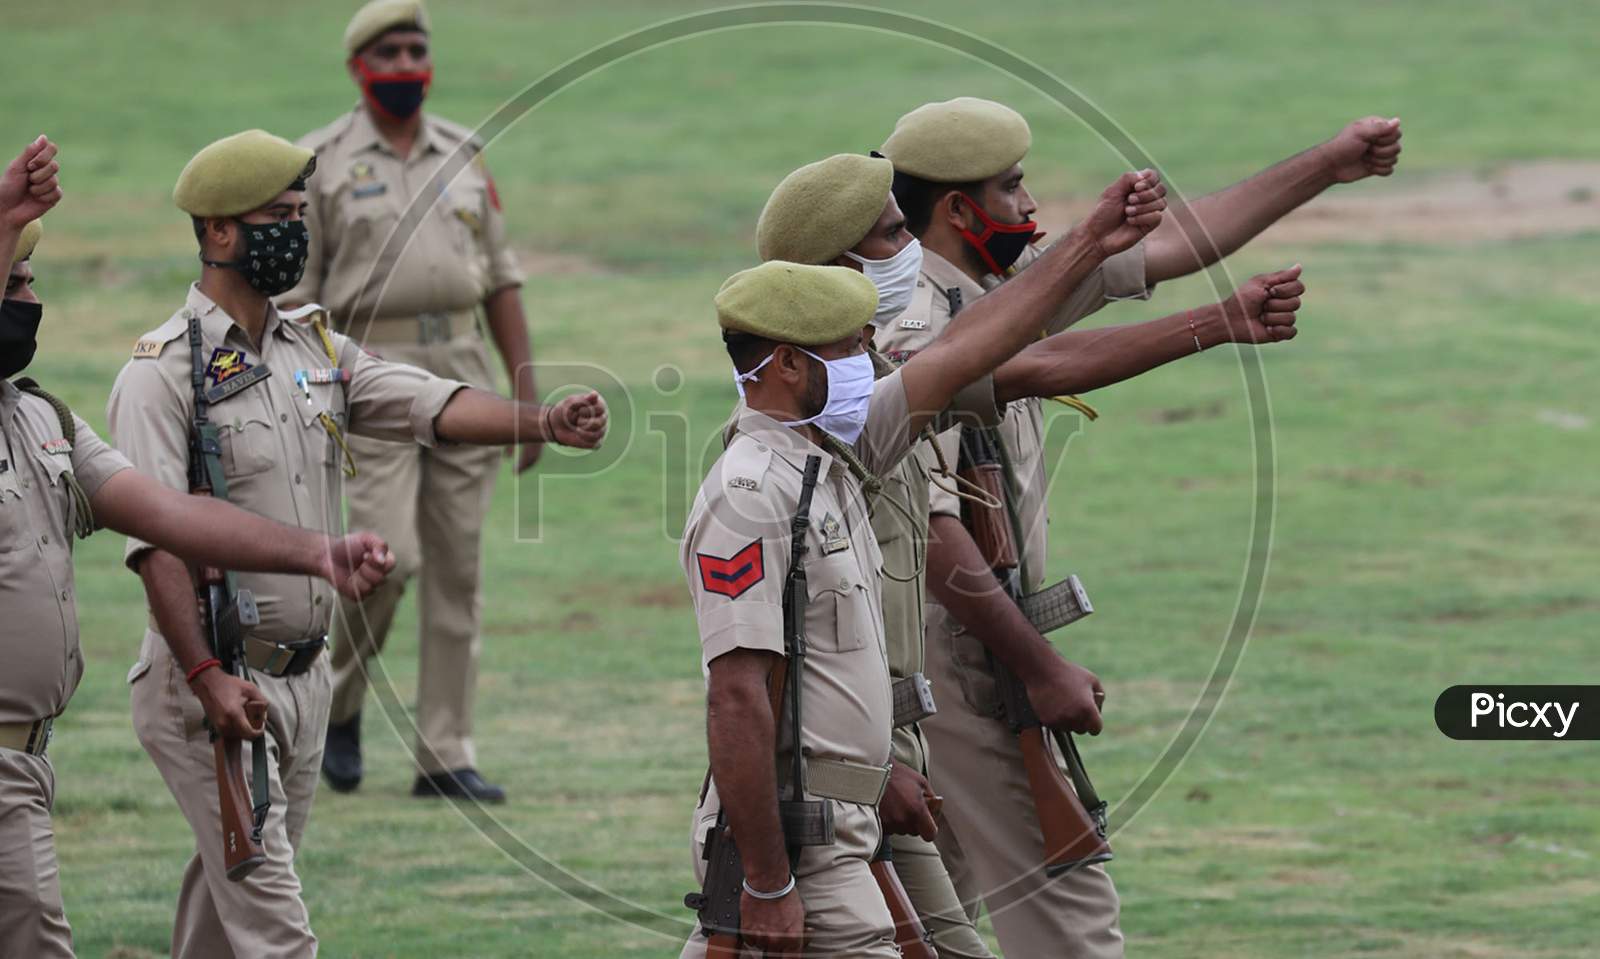 Jammu and Kashmir police rehearse march-past at the mini stadium ground ahead of Independence Day parade in Jammu, on August 9, 2020.